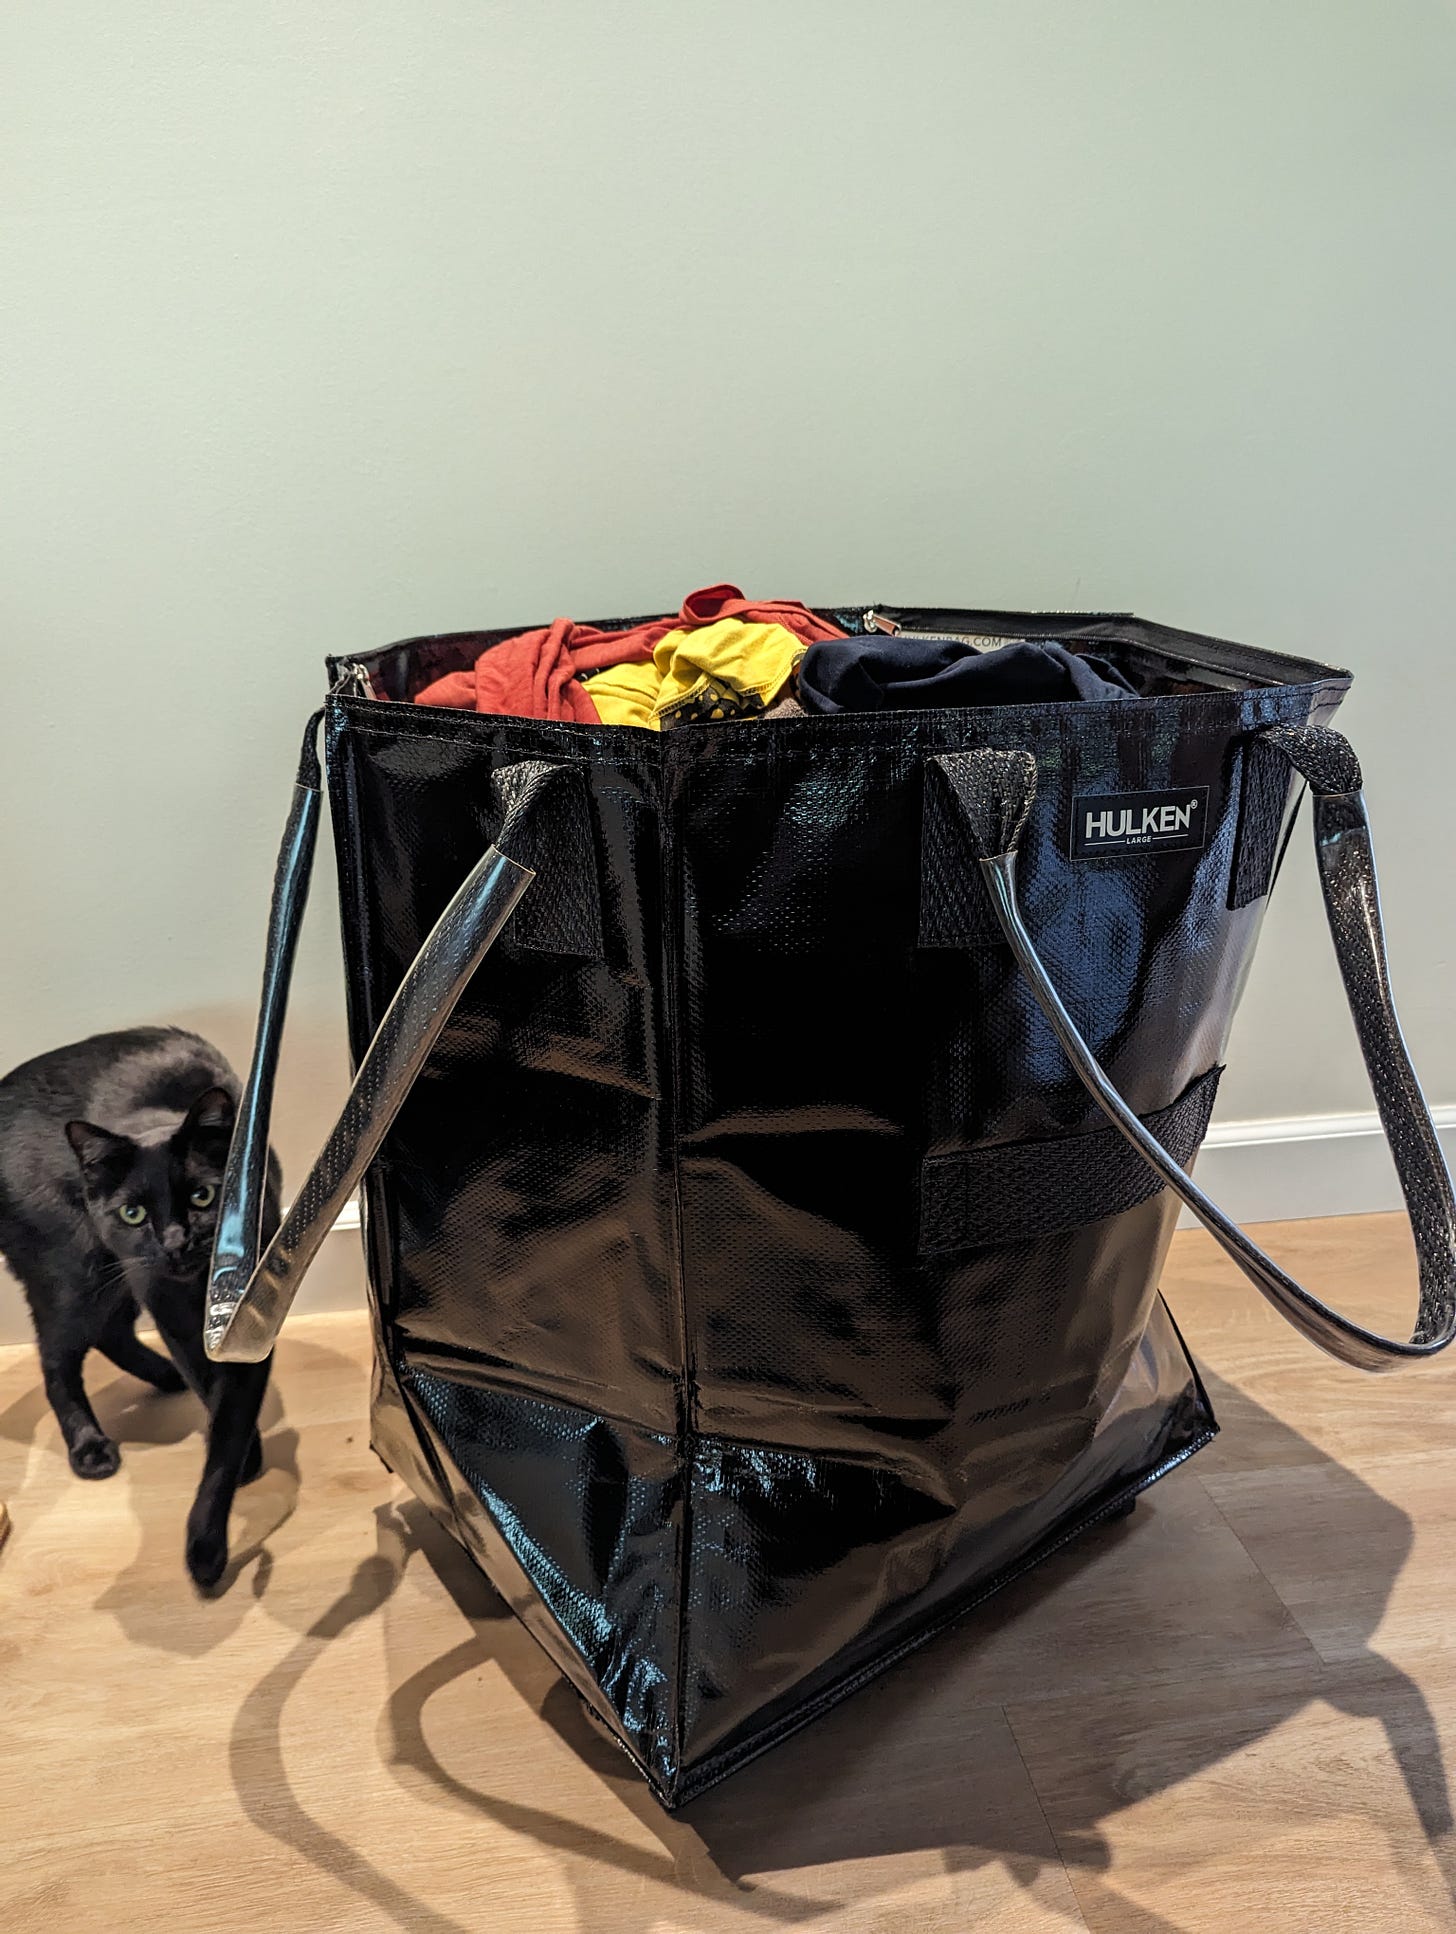 Hulken bag holding laundry while a black cat stands next to it with a look that could be curious or murderous